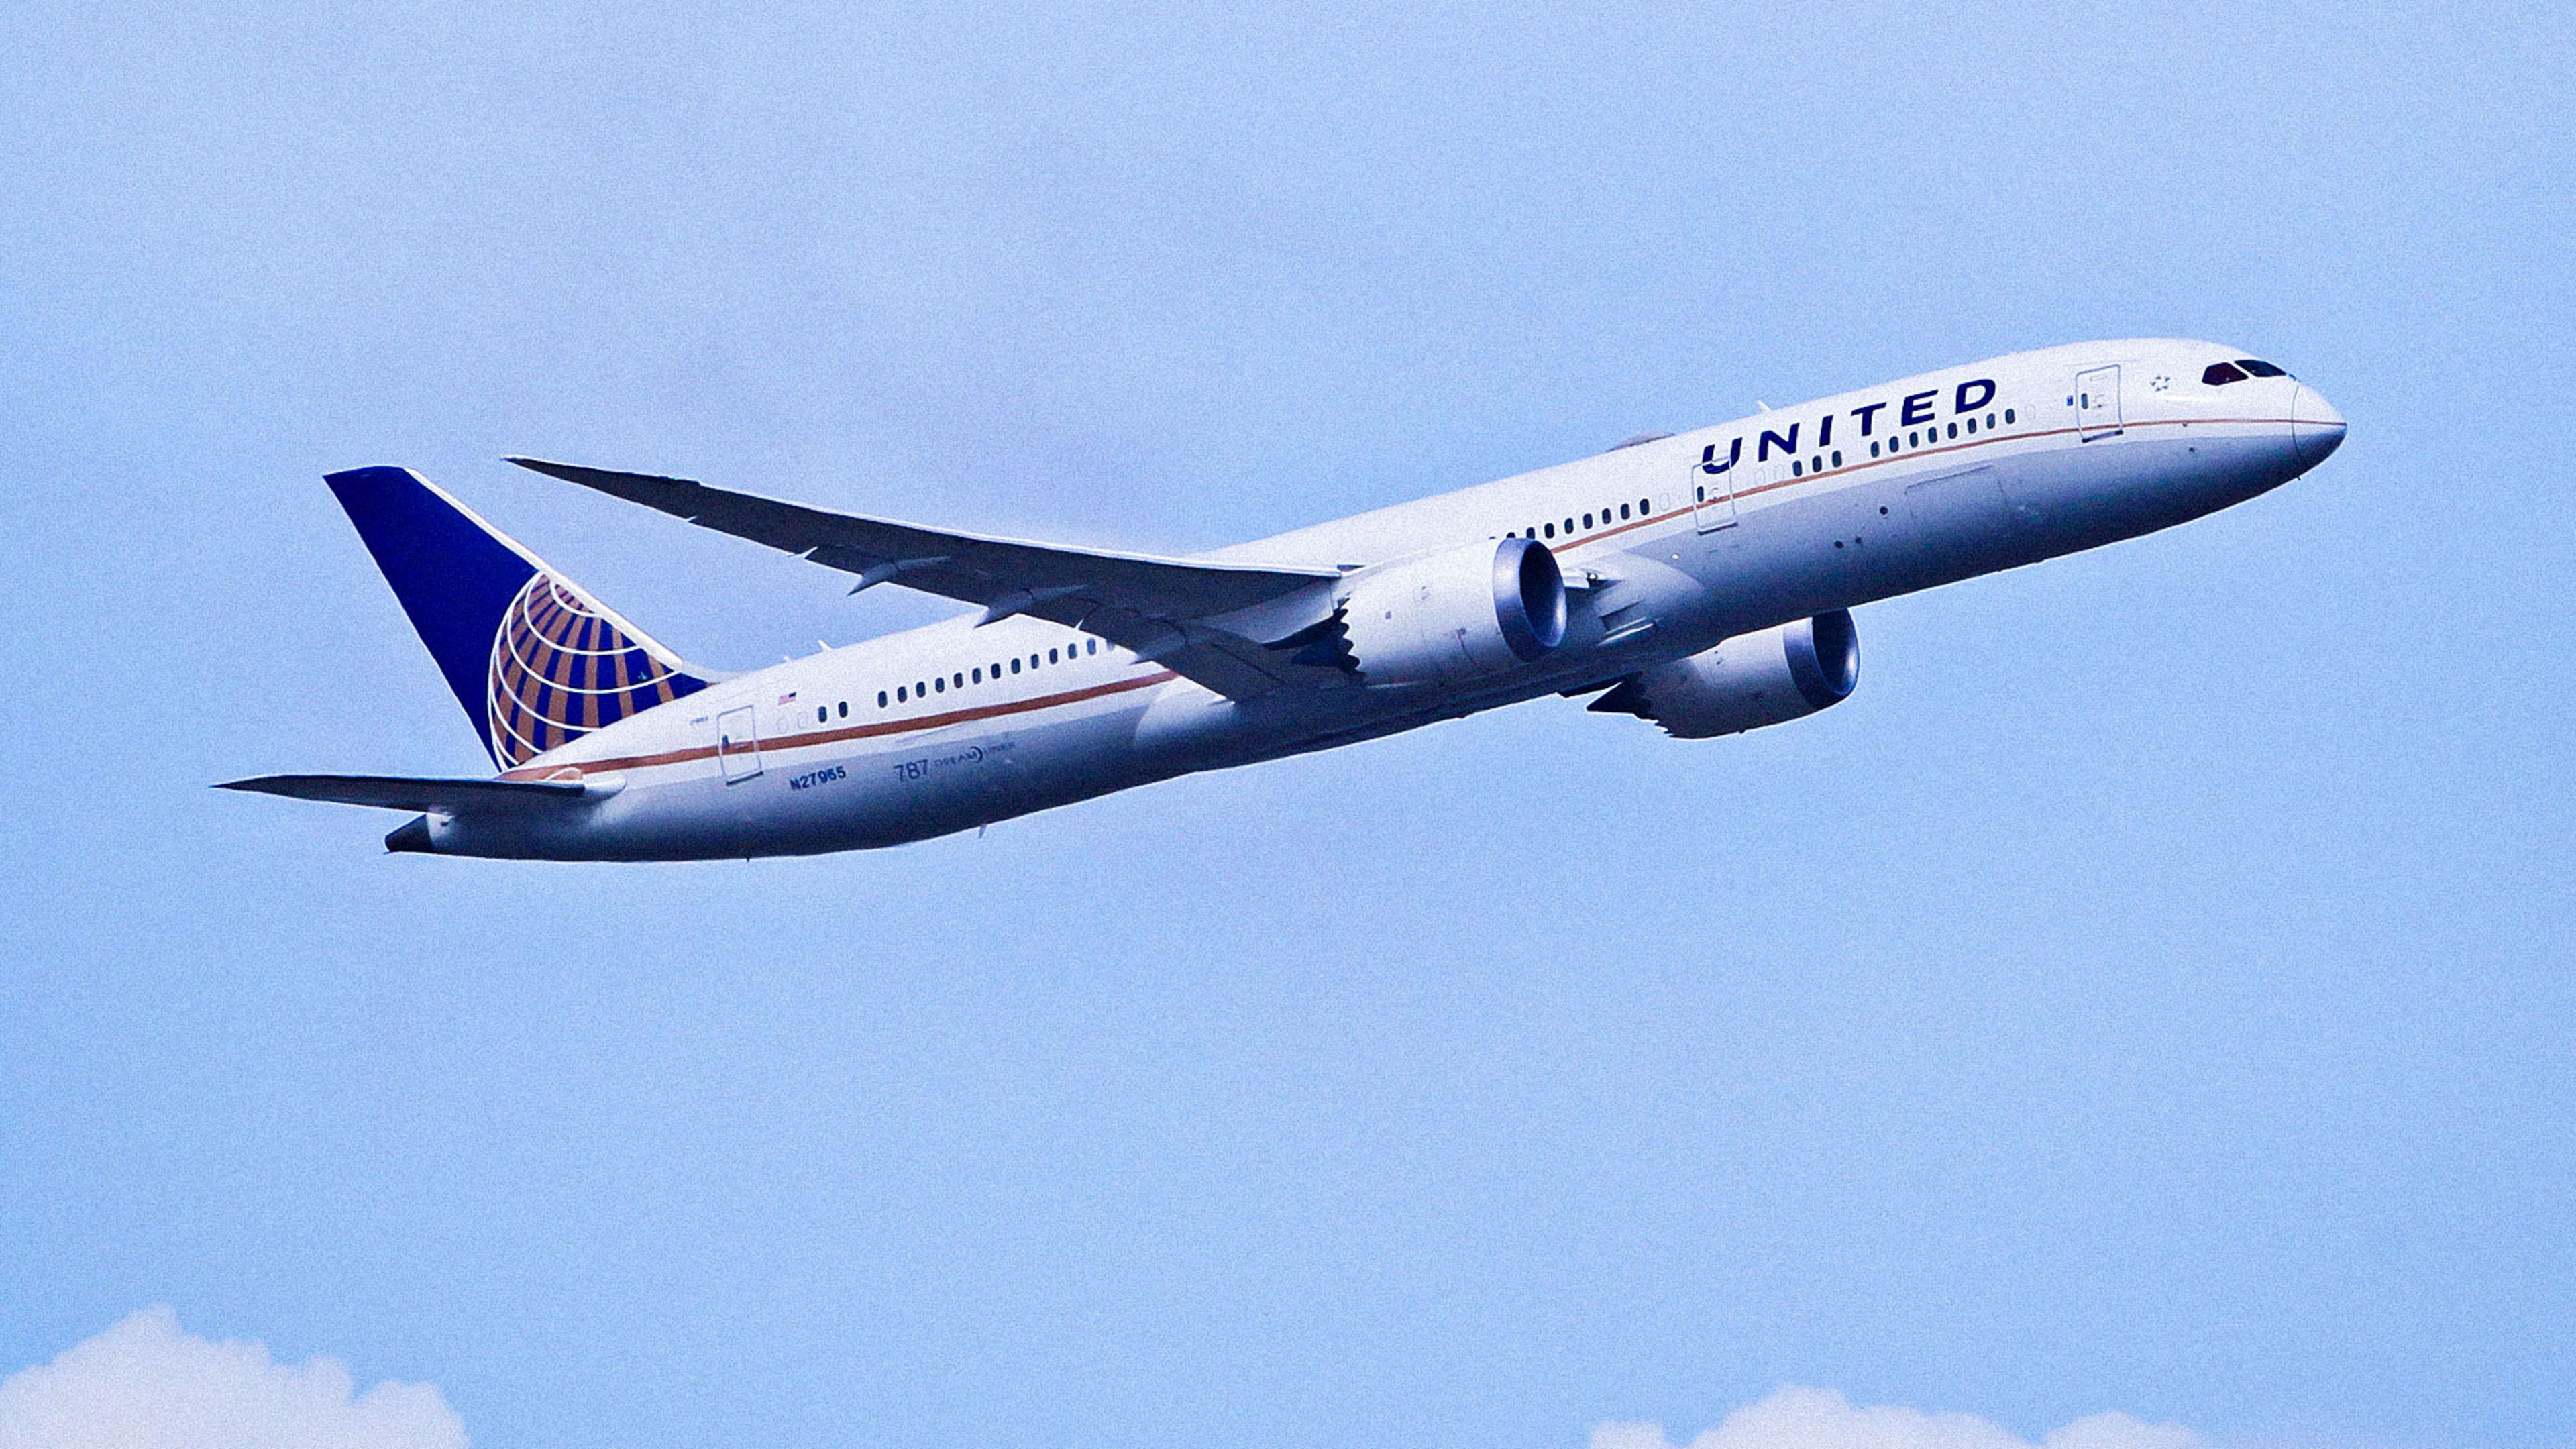 United Airlines touts diversity and sustainability in its first brand campaign since 2013